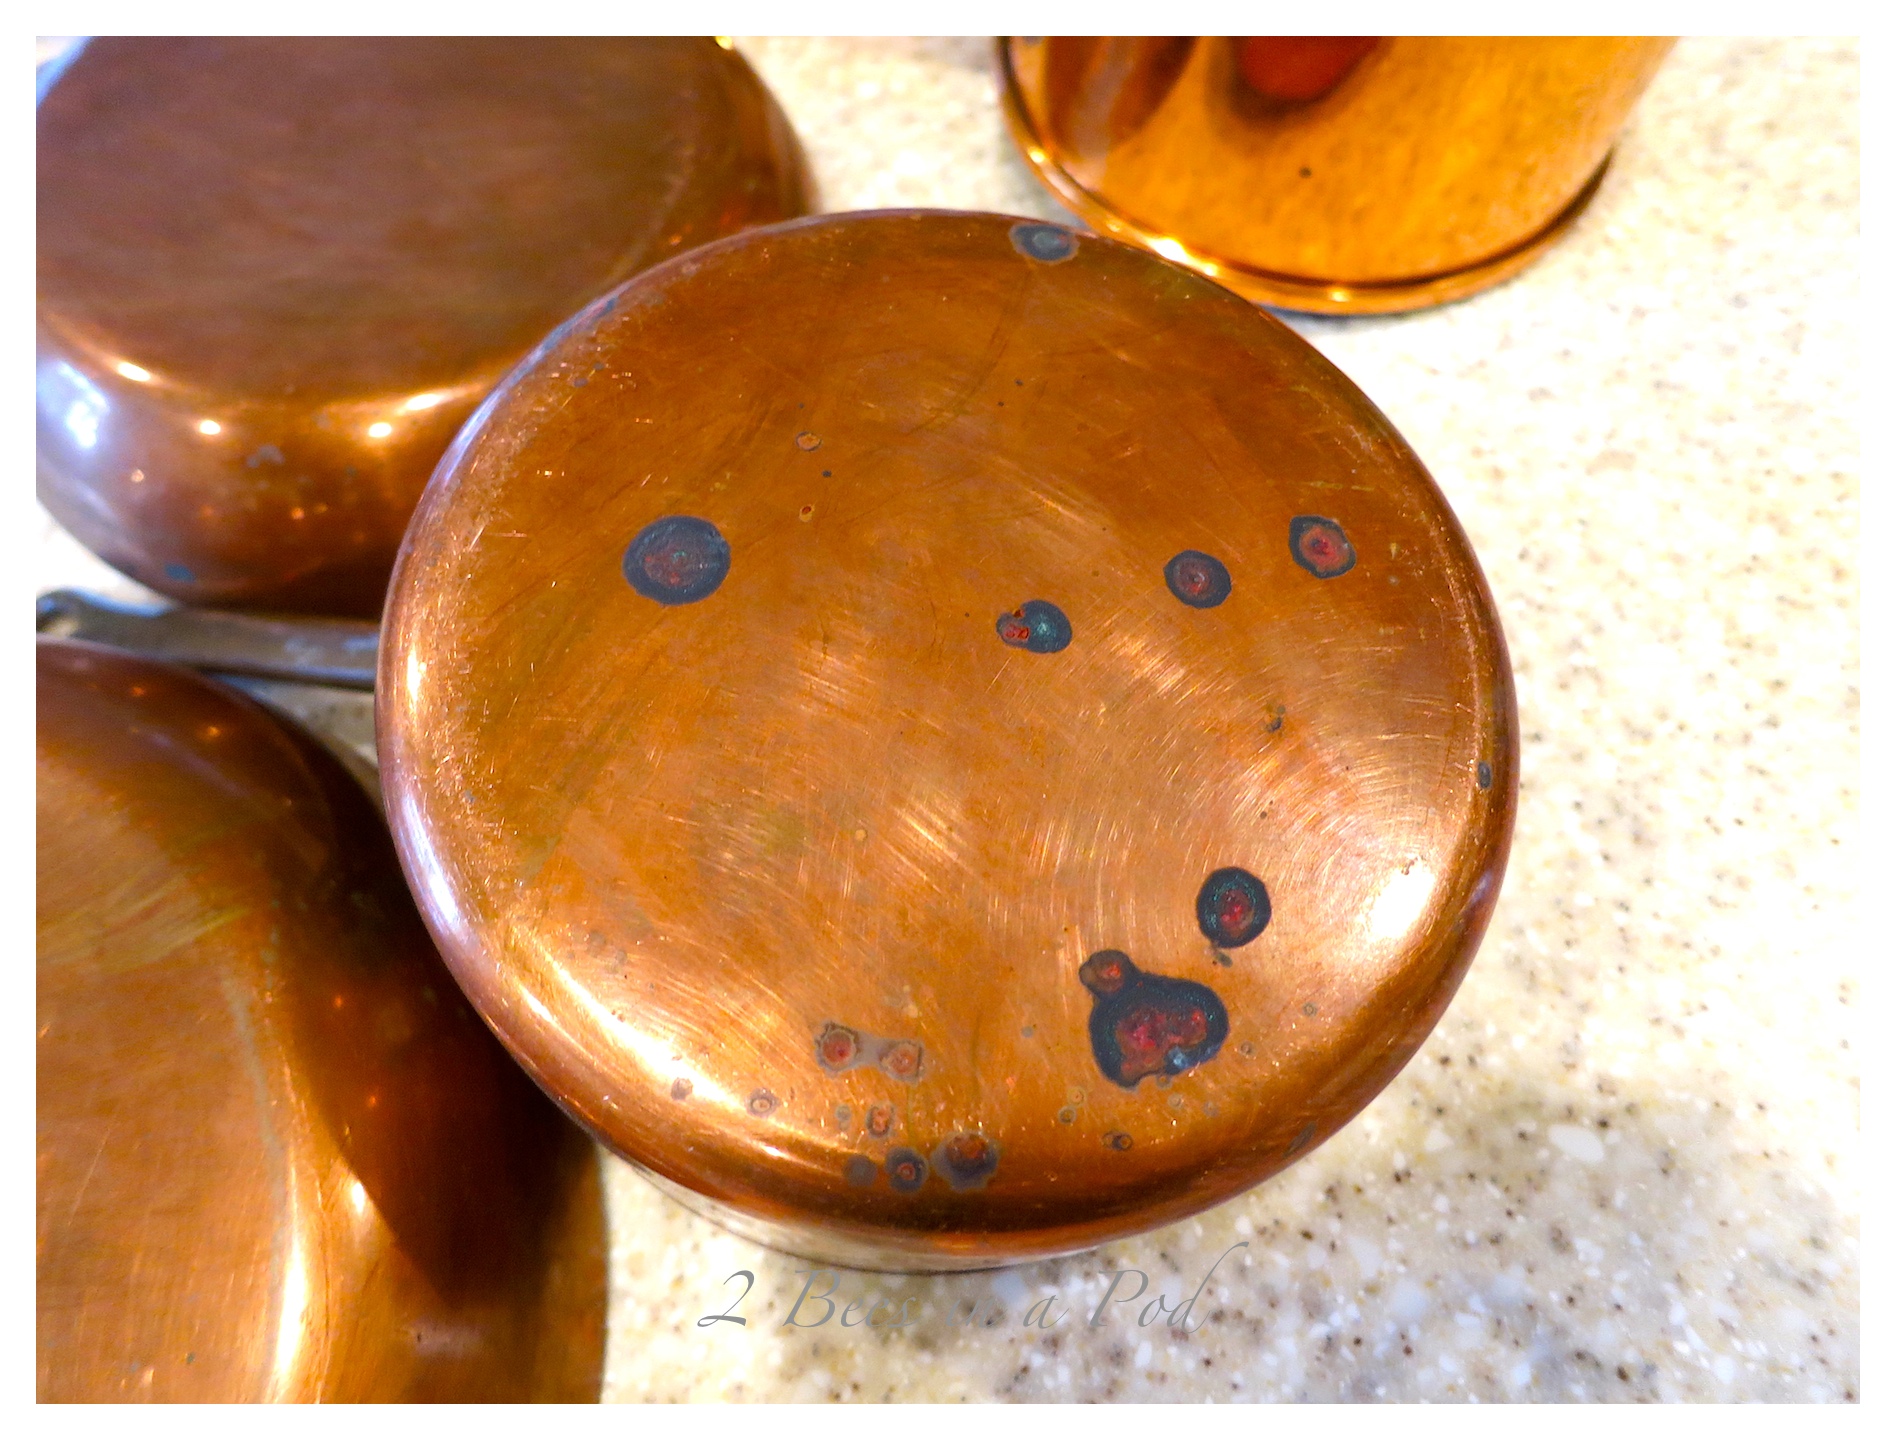 A safe and organic way to clean copper pots and pans. Use lemon and kosher salt to wipe away grime. Shiny and polished!